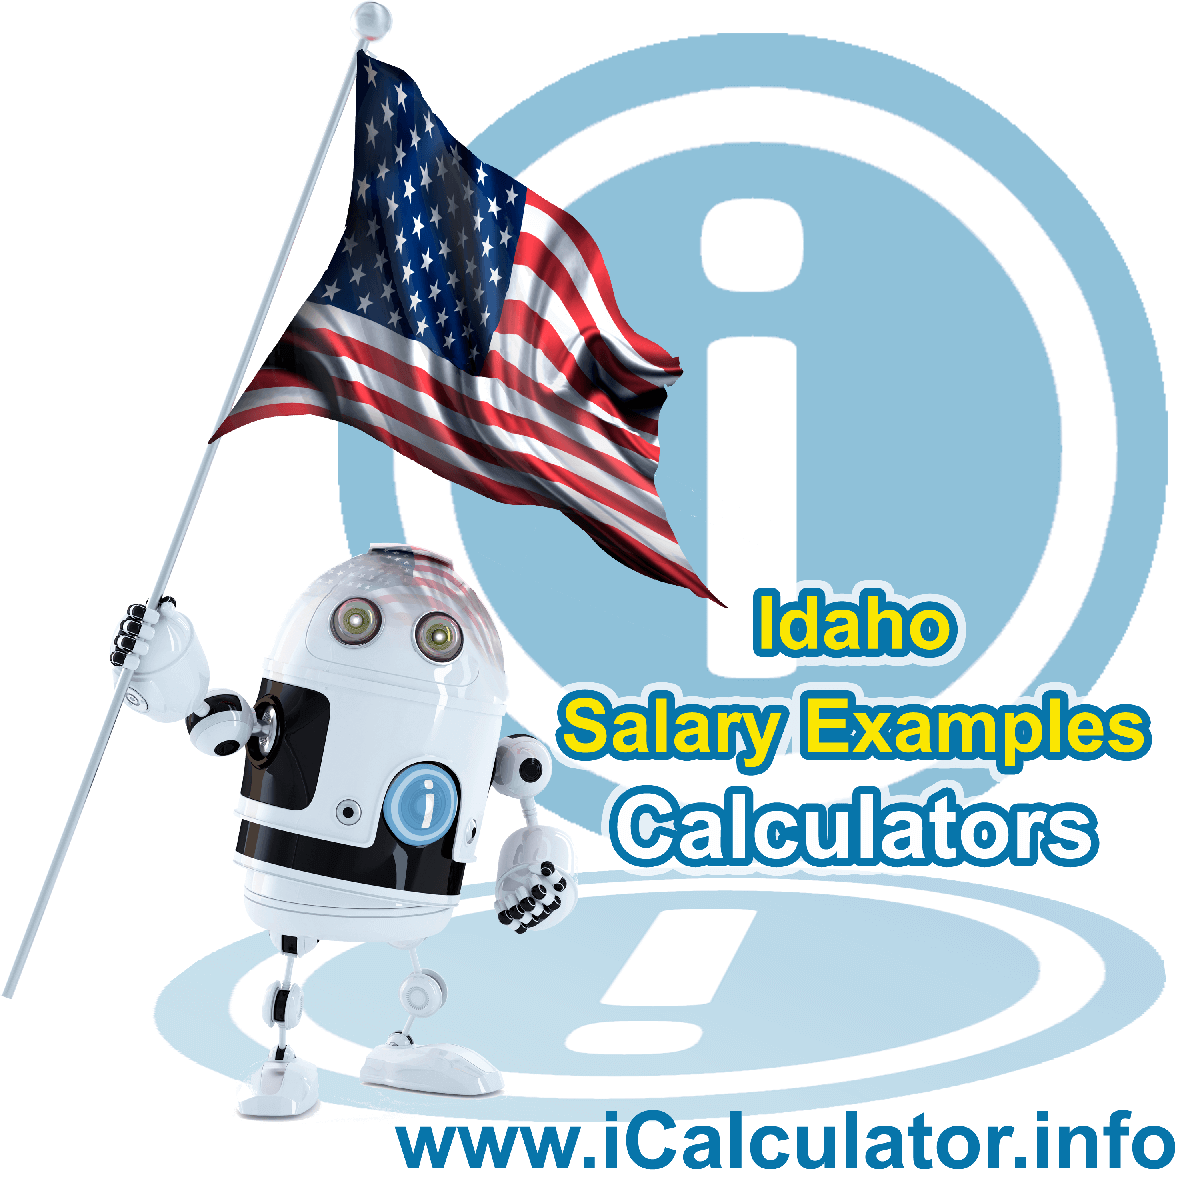 Idaho Salary Example for $130,000.00 in 2022 | iCalculator™ | $130,000.00 salary example for employee and employer paying Idaho State tincome taxes. Detailed salary after tax calculation including Idaho State Tax, Federal State Tax, Medicare Deductions, Social Security, Capital Gains and other income tax and salary deductions complete with supporting Idaho state tax tables 